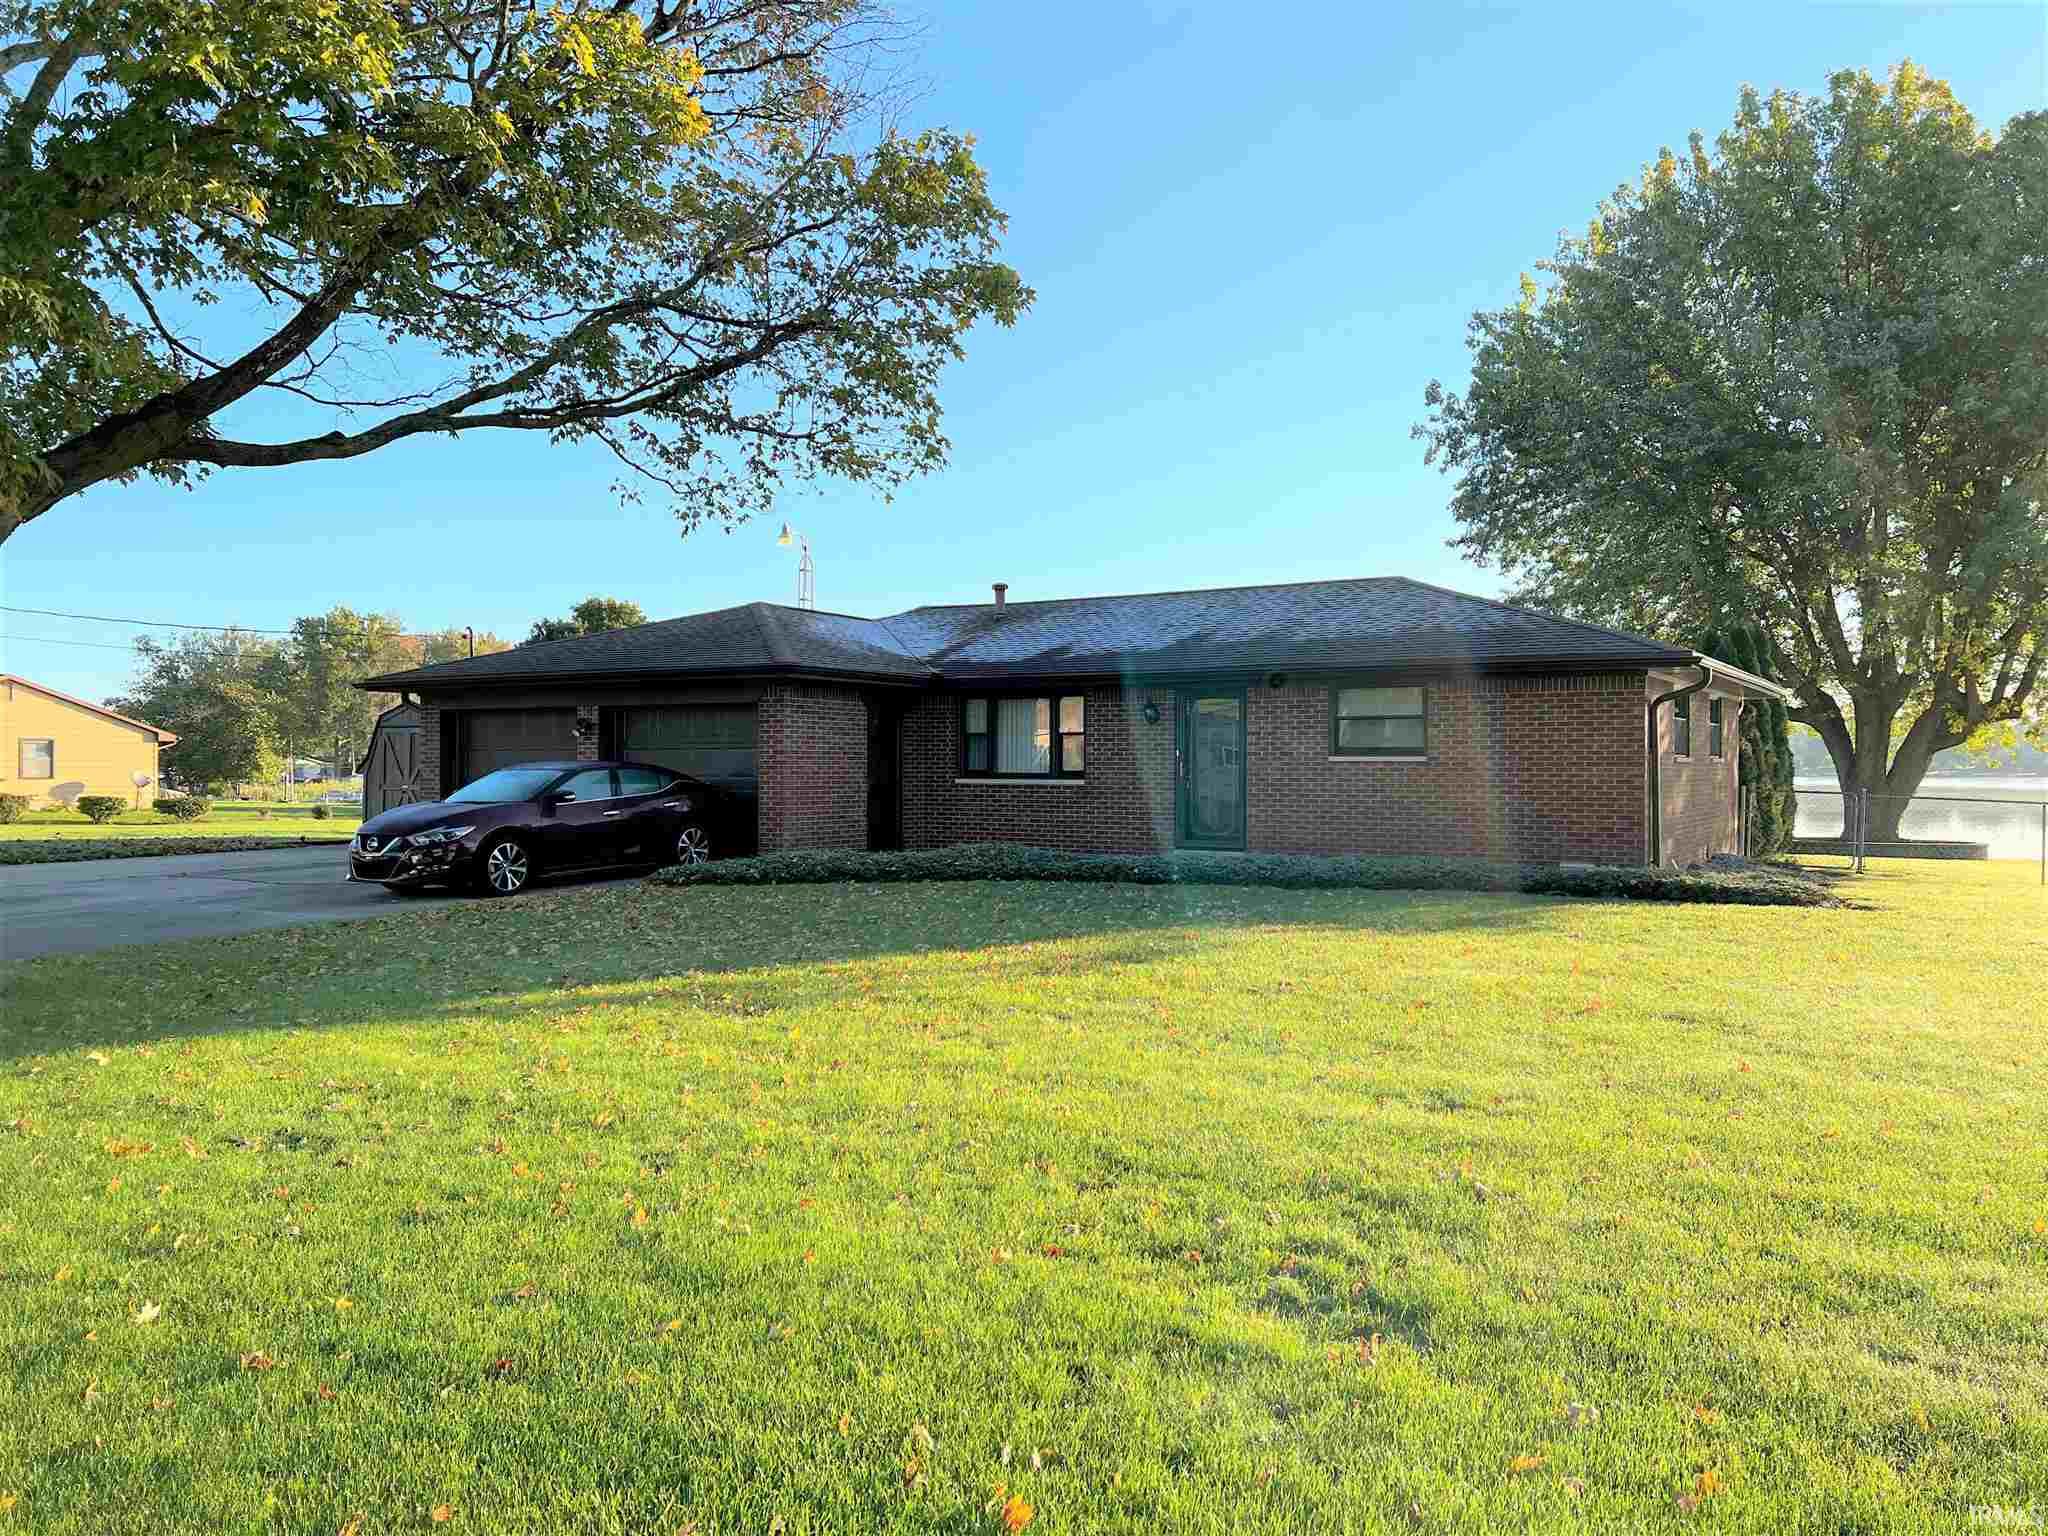 2832 N Lakeview Drive, Warsaw, IN 46582